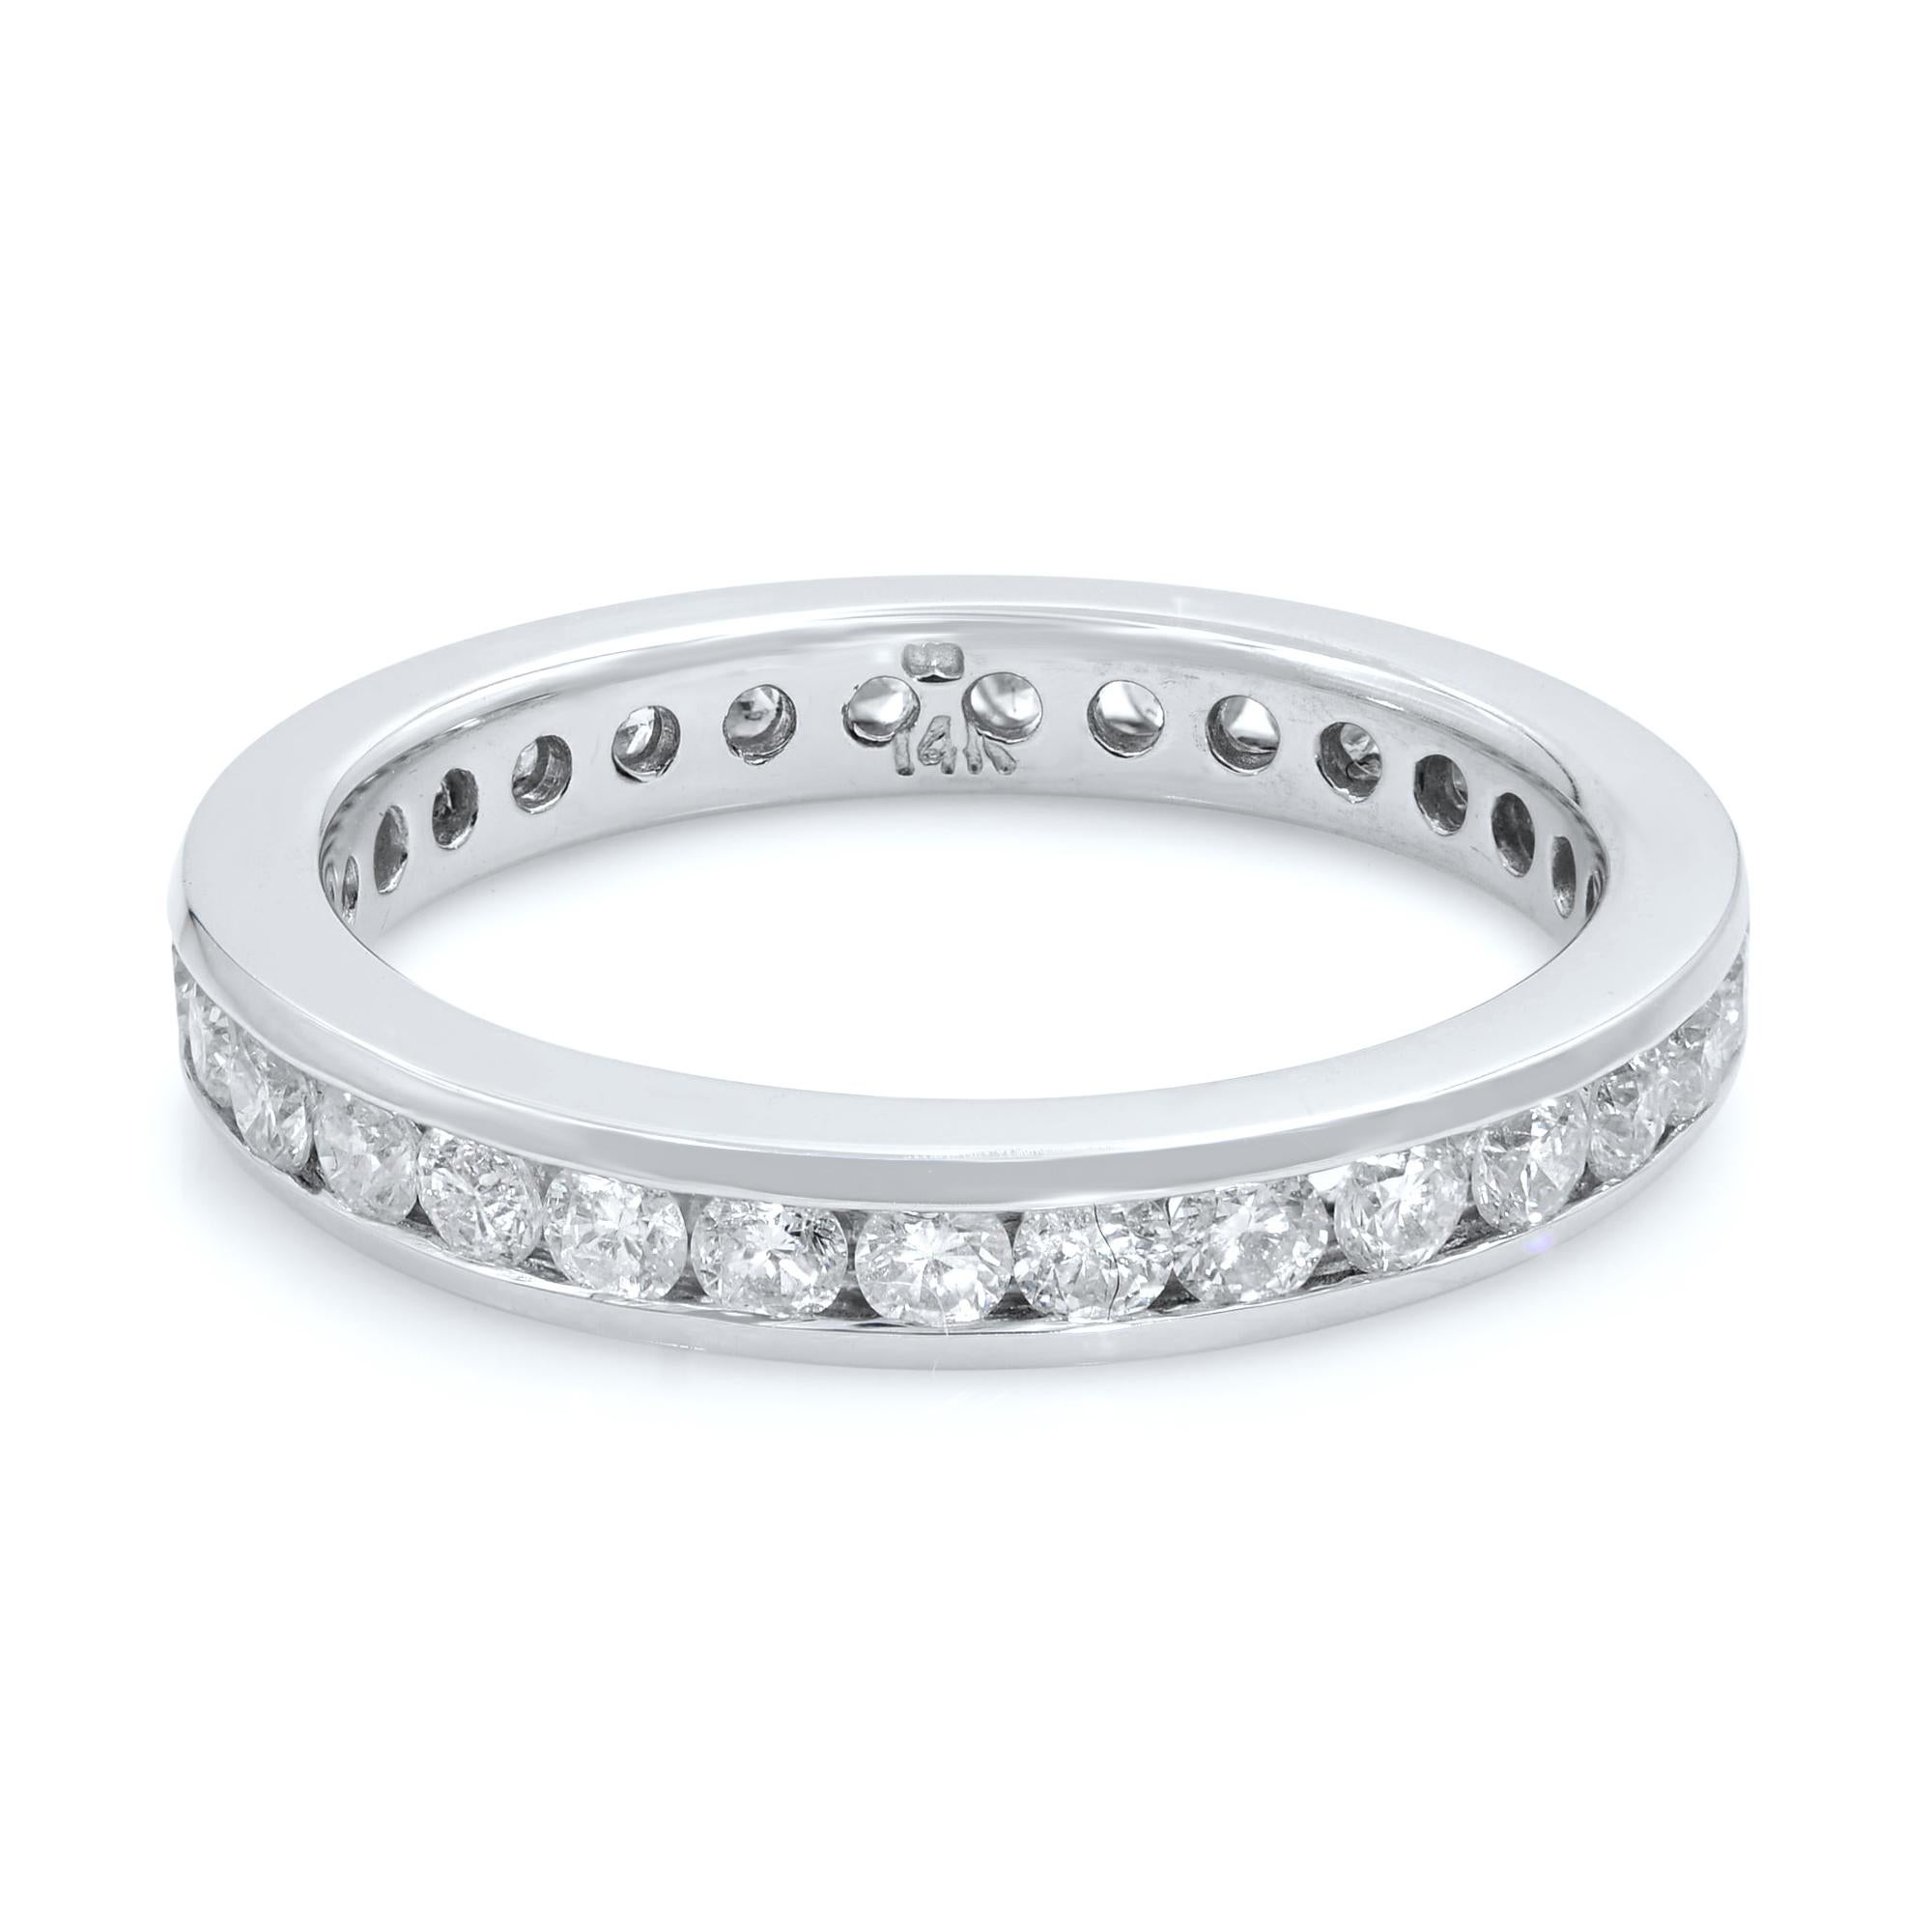 Celebrate your enduring love with this stunning wedding/anniversary band encrusted with sparkling diamonds. This elegant 14k white gold ring comes with round cut diamonds in channel setting all along the band. Total diamond carat weight is 0.60. The